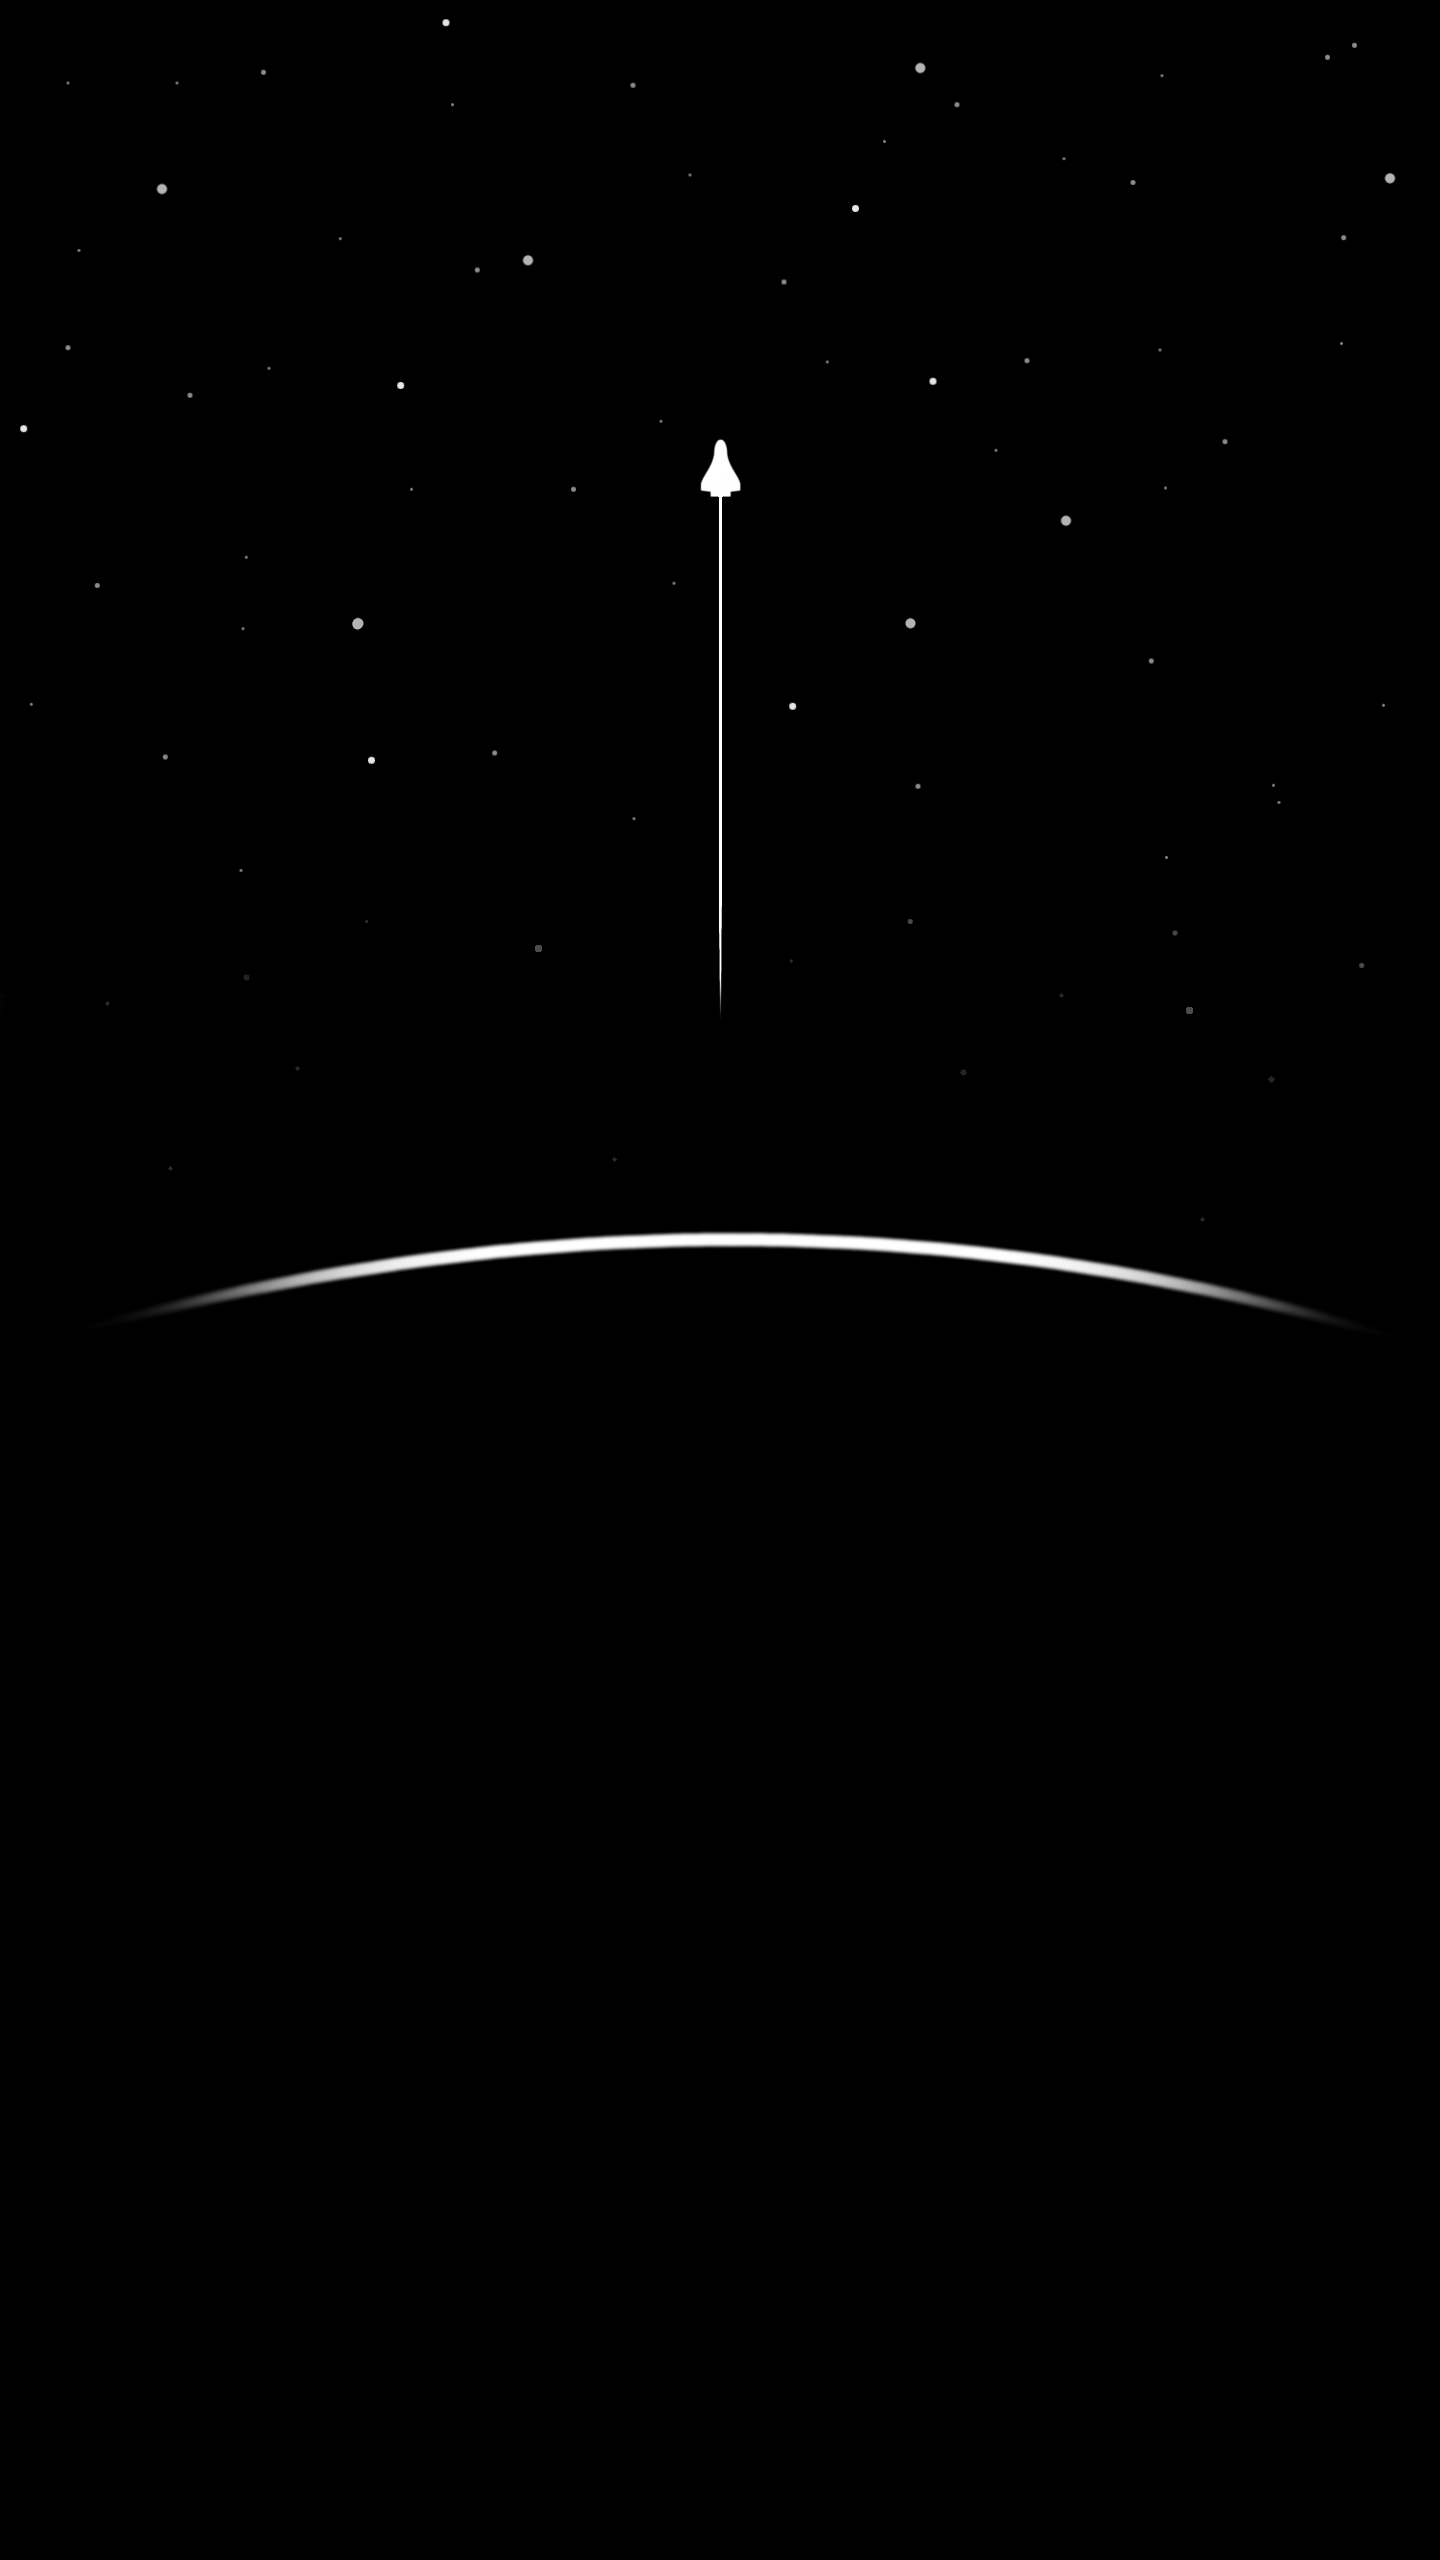 Black Amoled Wallpaper Group , Download for free